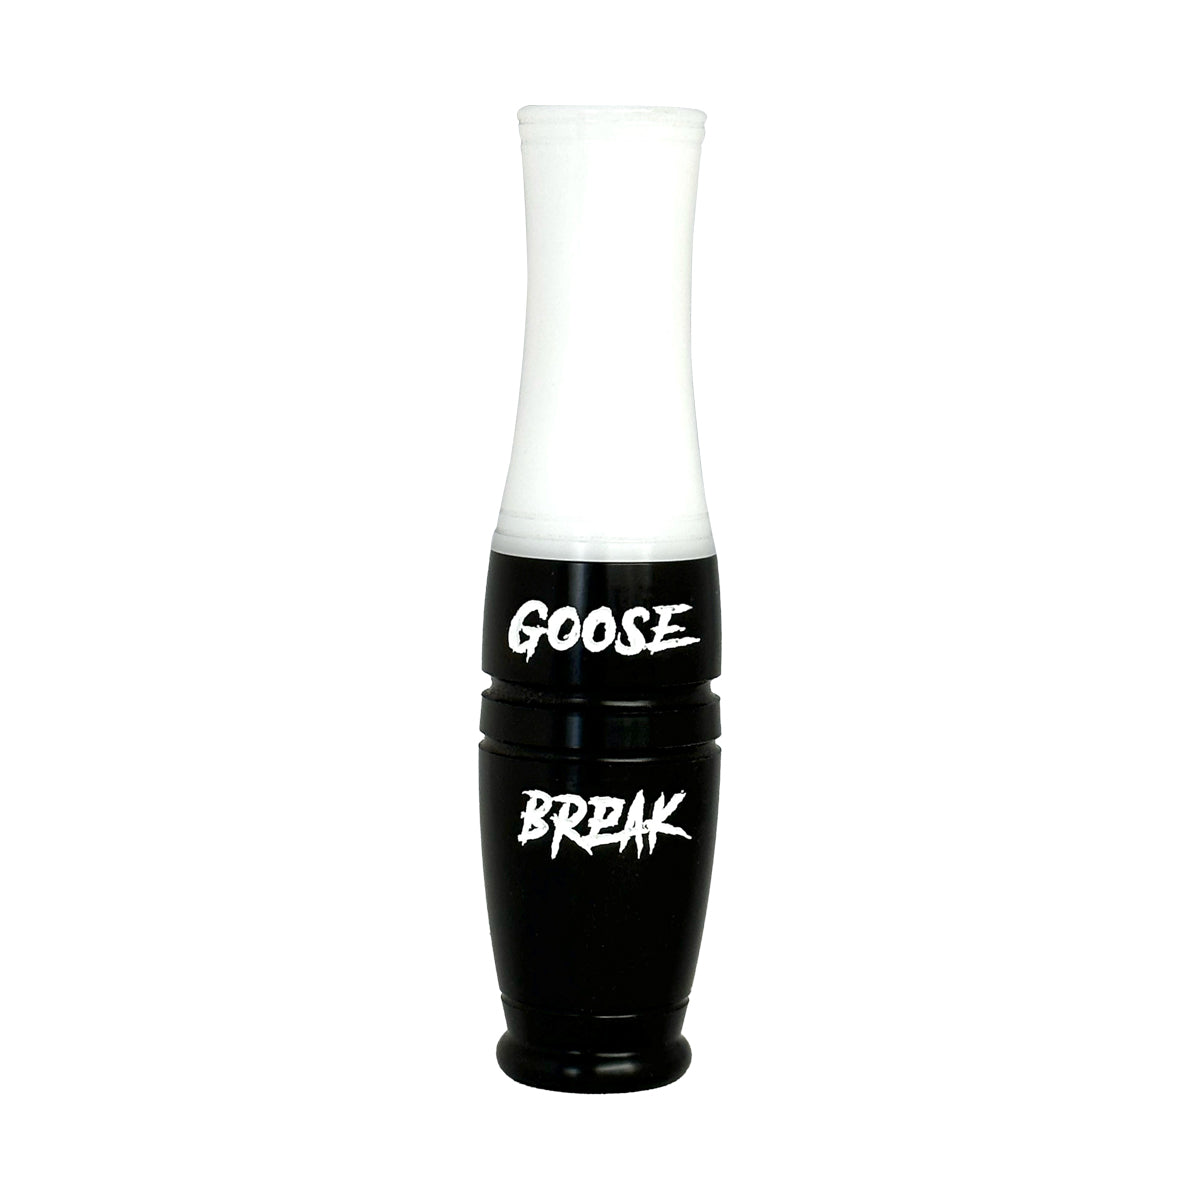 Call out “Goose Break” by Recall Designs